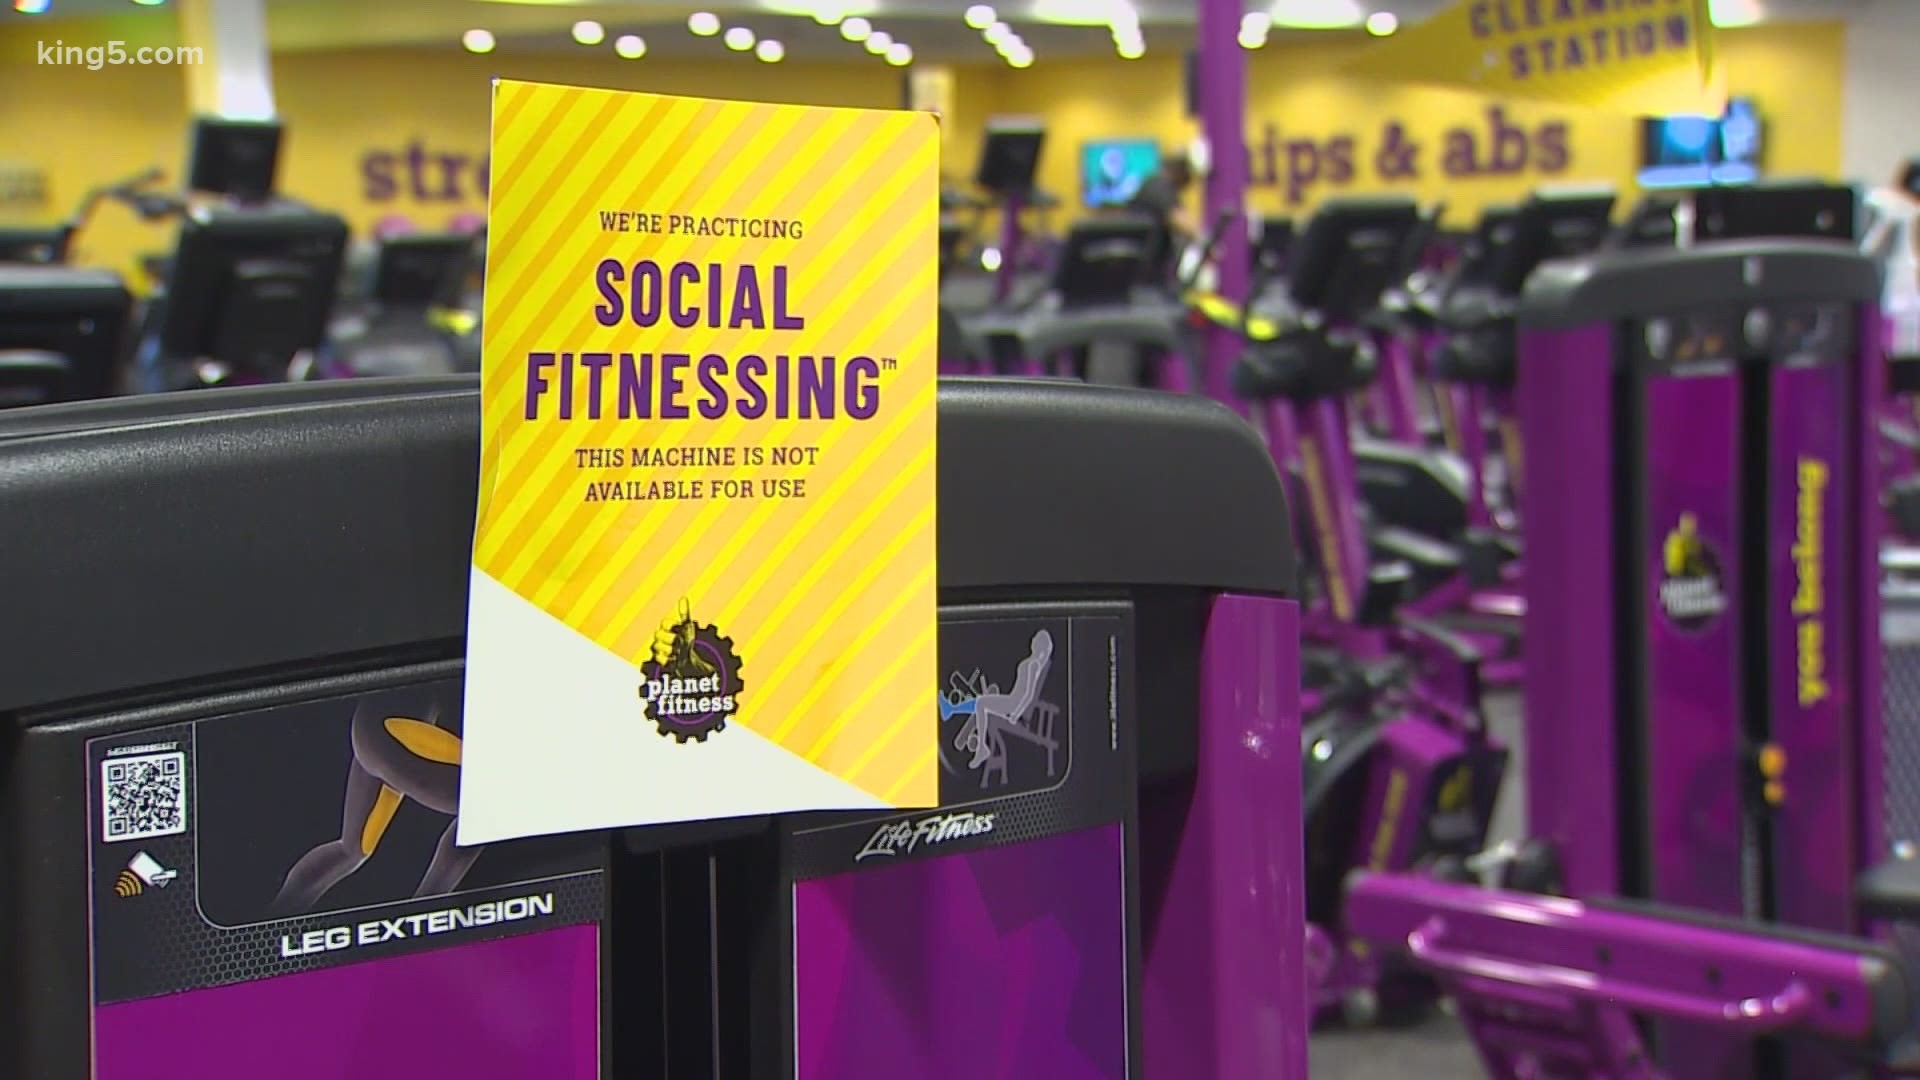 All regions of Washington are in Phase 1, which prohibits indoor dining and social gatherings and allows for very limited capacity at gyms and entertainment venues.